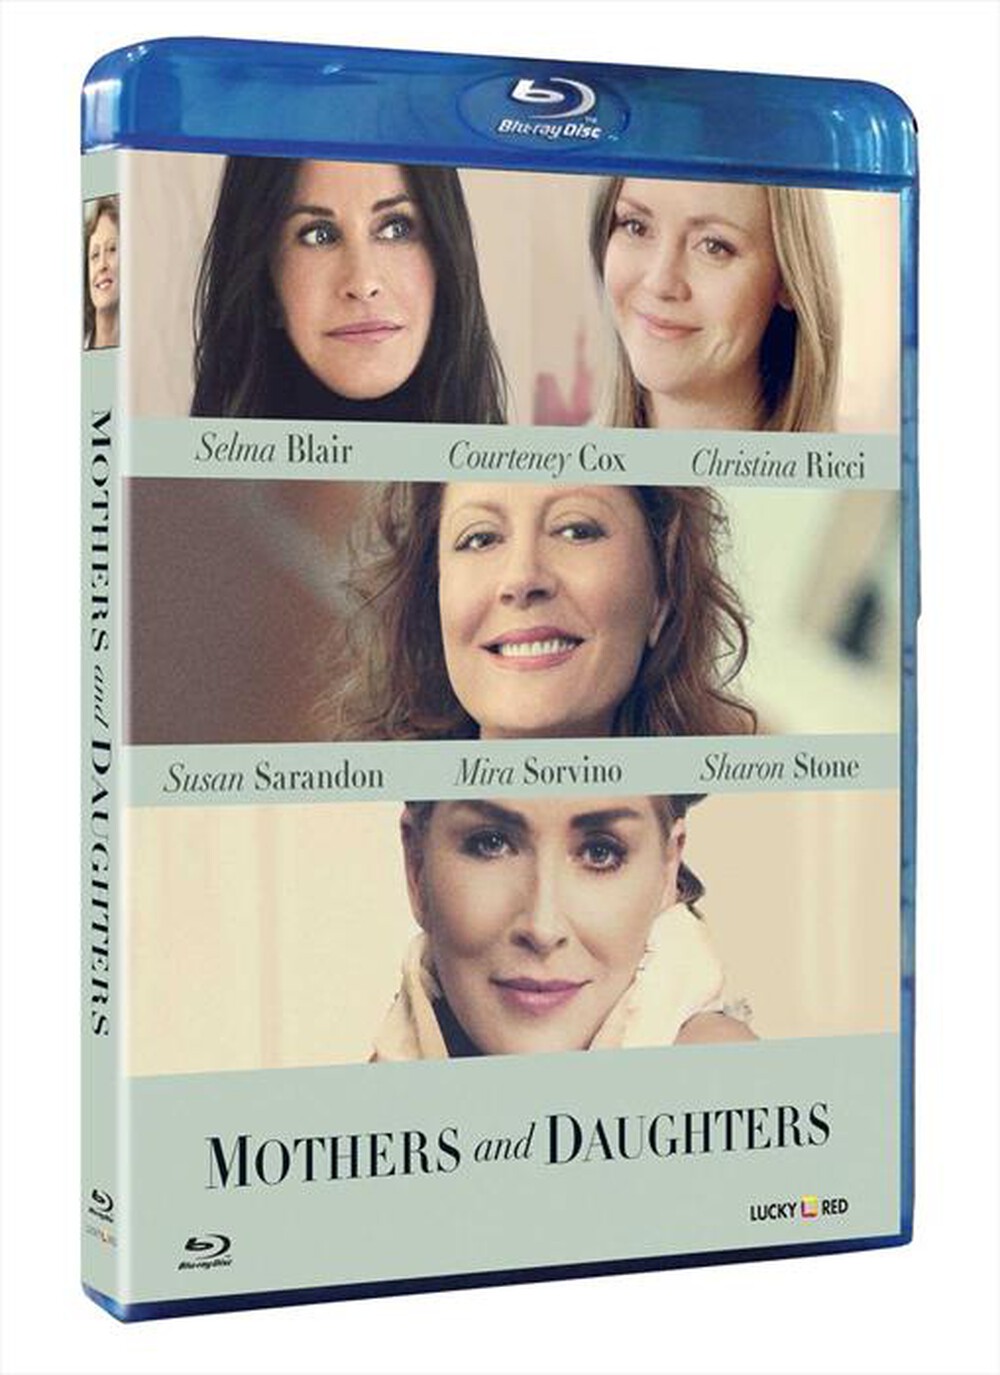 "KOCH MEDIA - Mothers And Daughters"